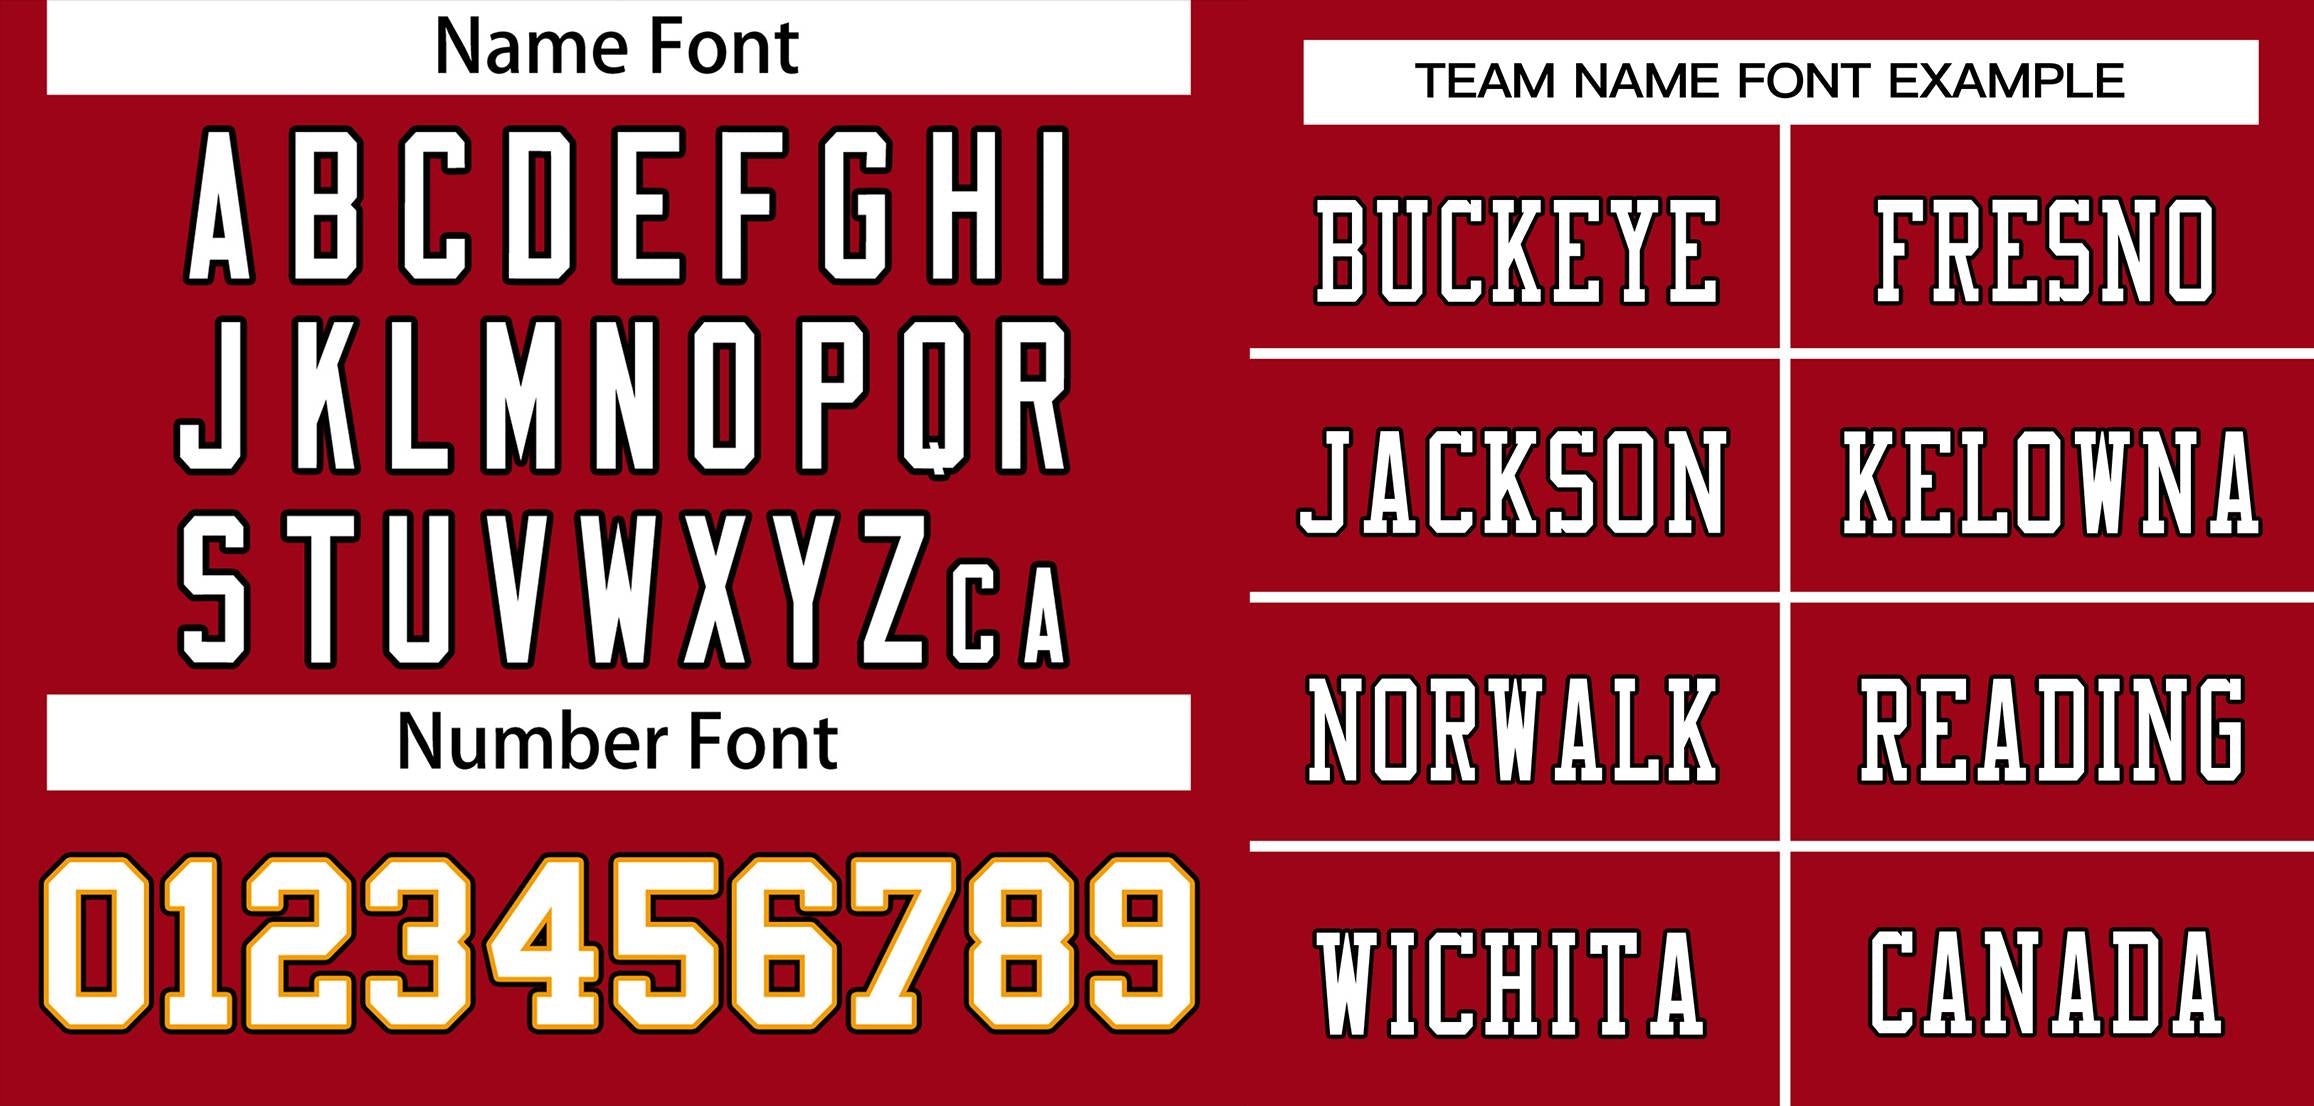 football jersey store name and number font